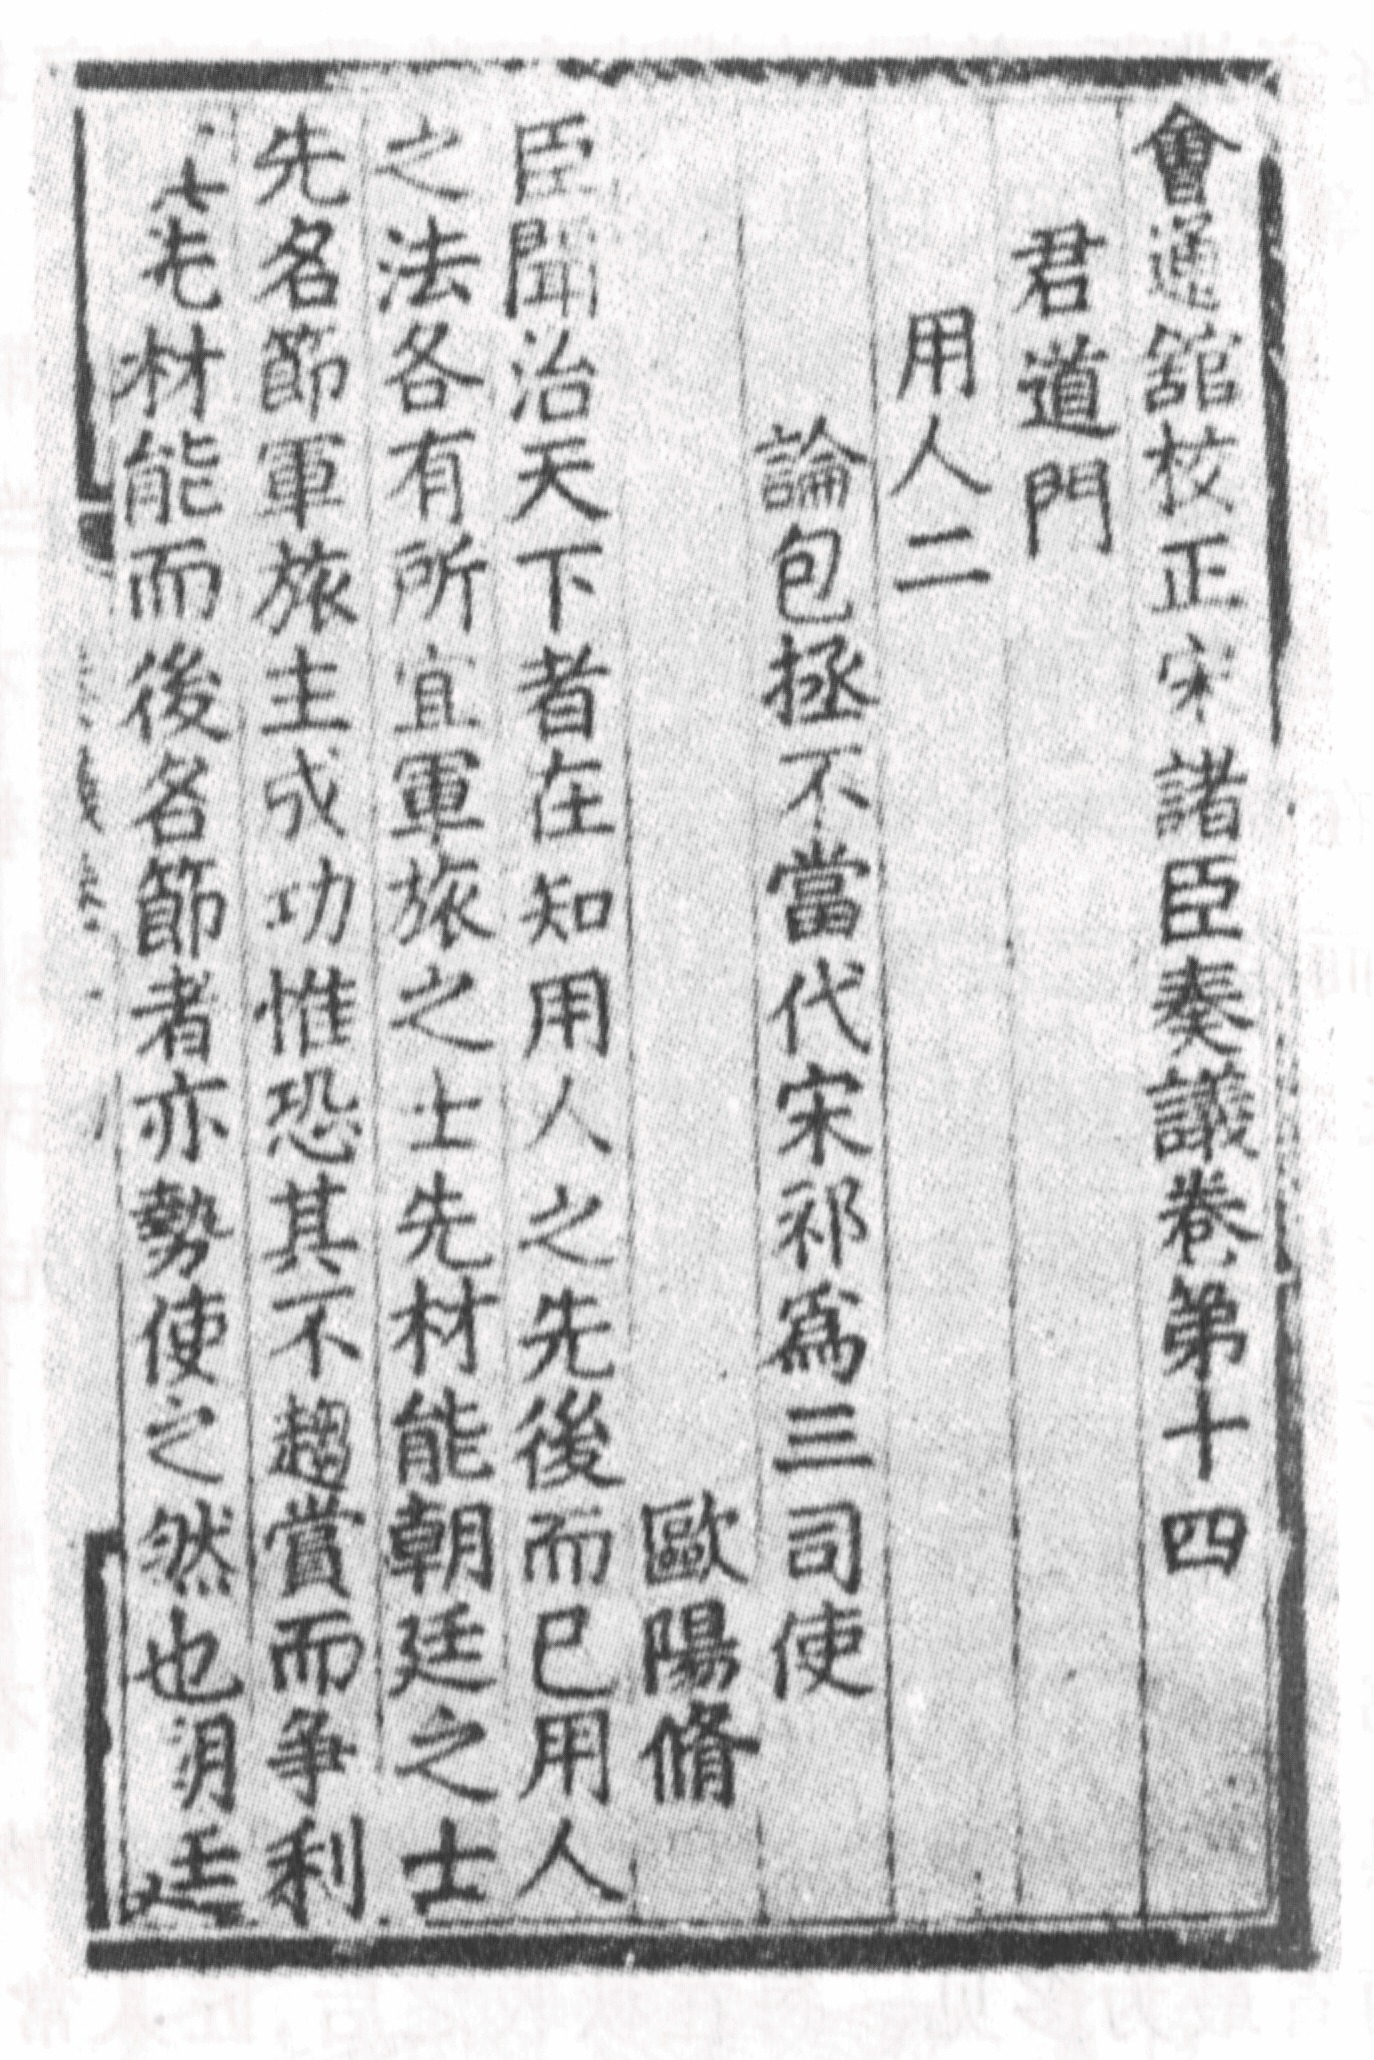 A page printed using the movable type printing technique